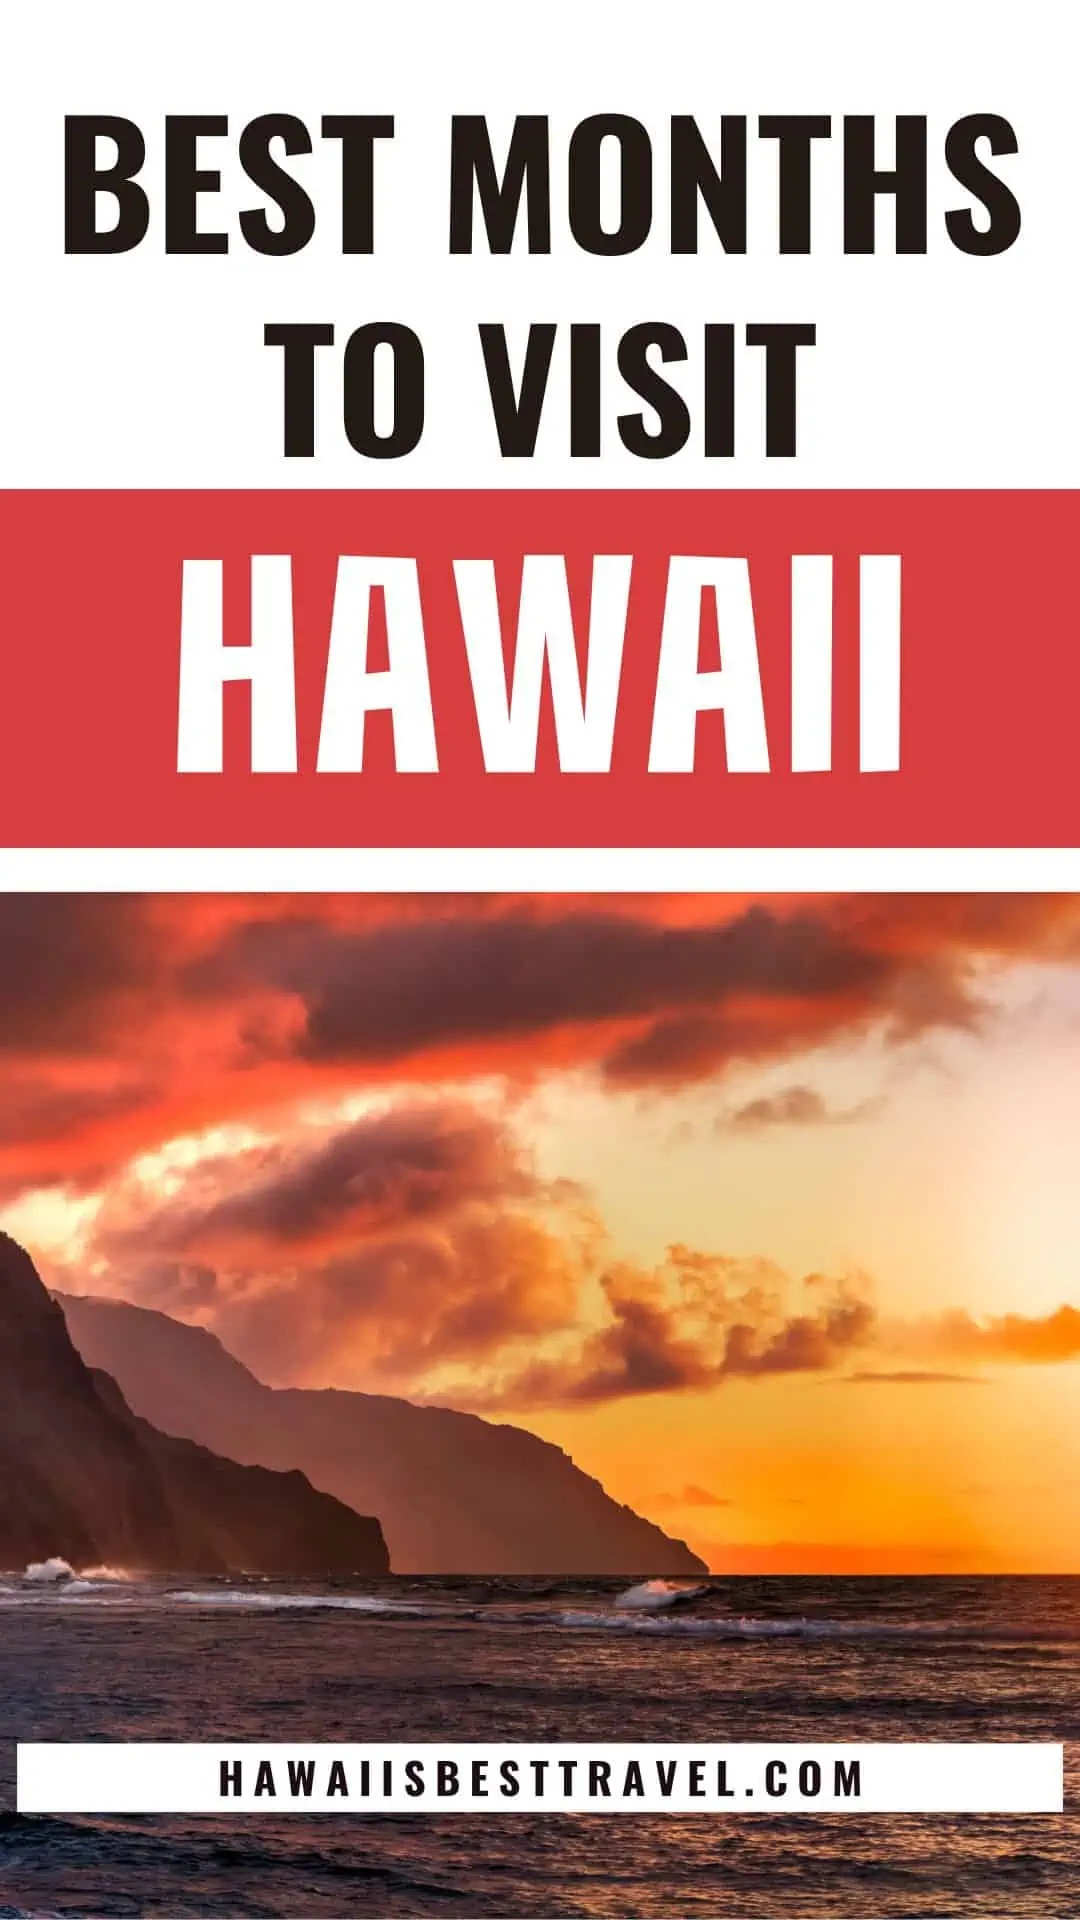 best months to visit hawaii - pin